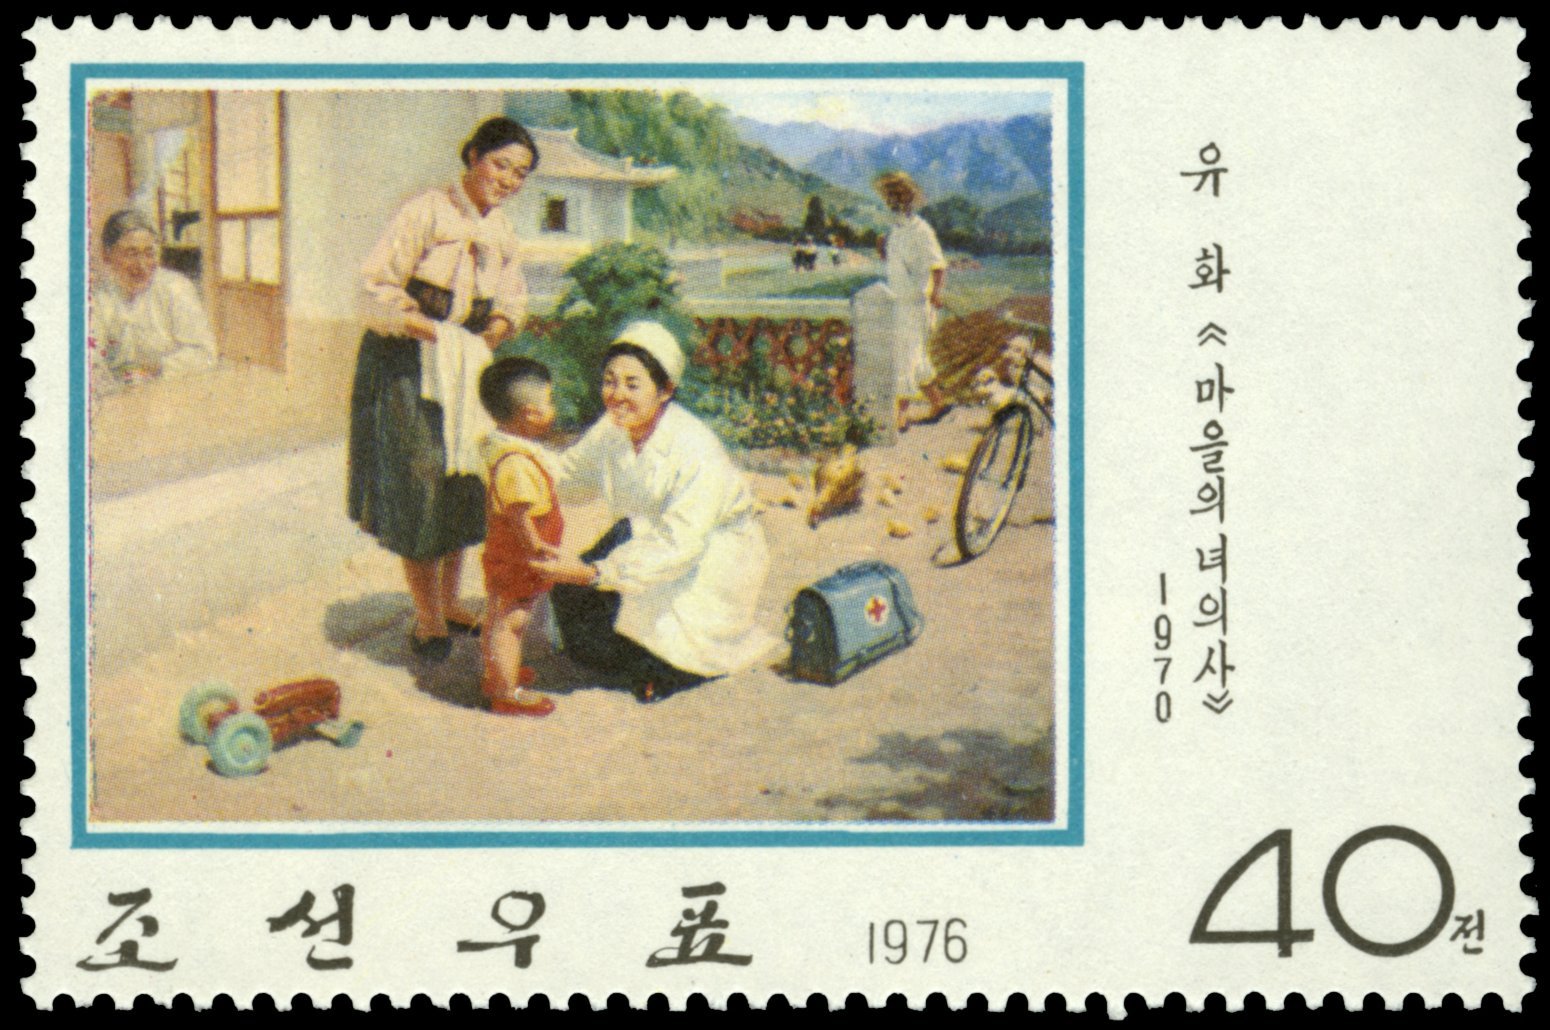 A white-suited nurses kneels to talk with a small boy as the boy's mother looks on. In the background are a lake and mountains.